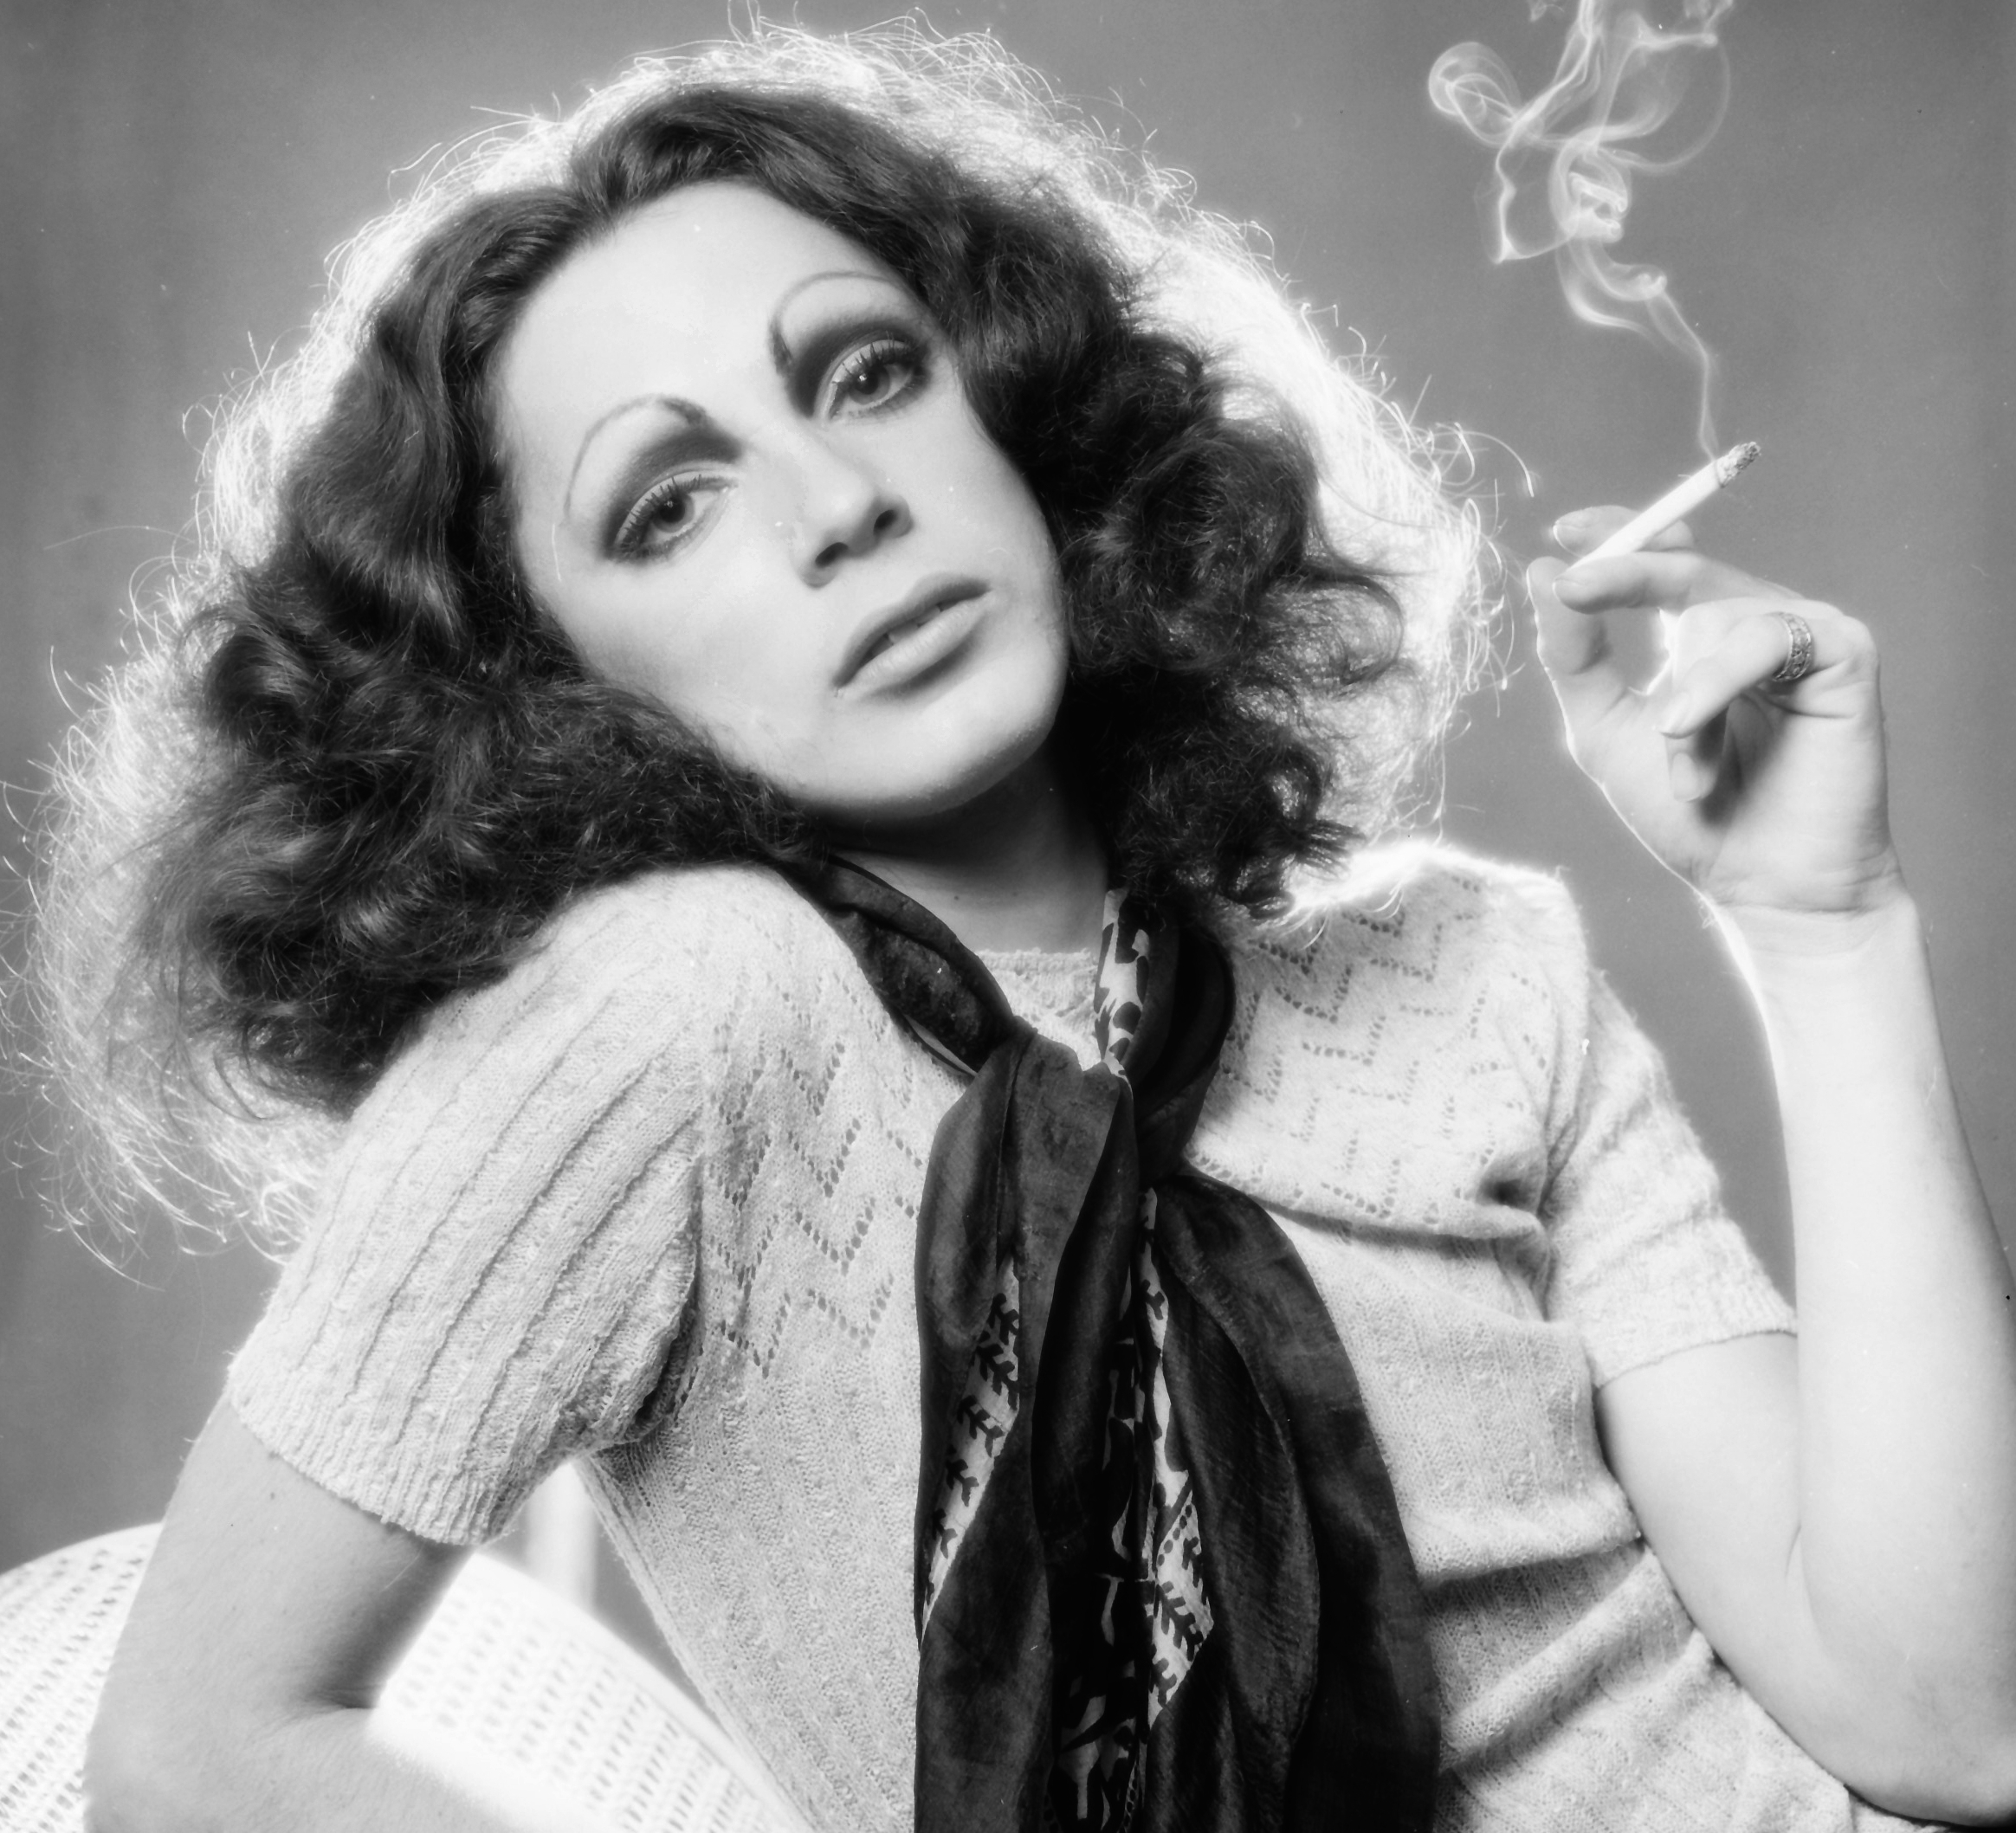 Hardcore Schoolgirl Porn Gif Tumblr - Holly Woodlawn, Warhol Superstar, Dead at 69 - The Gay & Lesbian Review